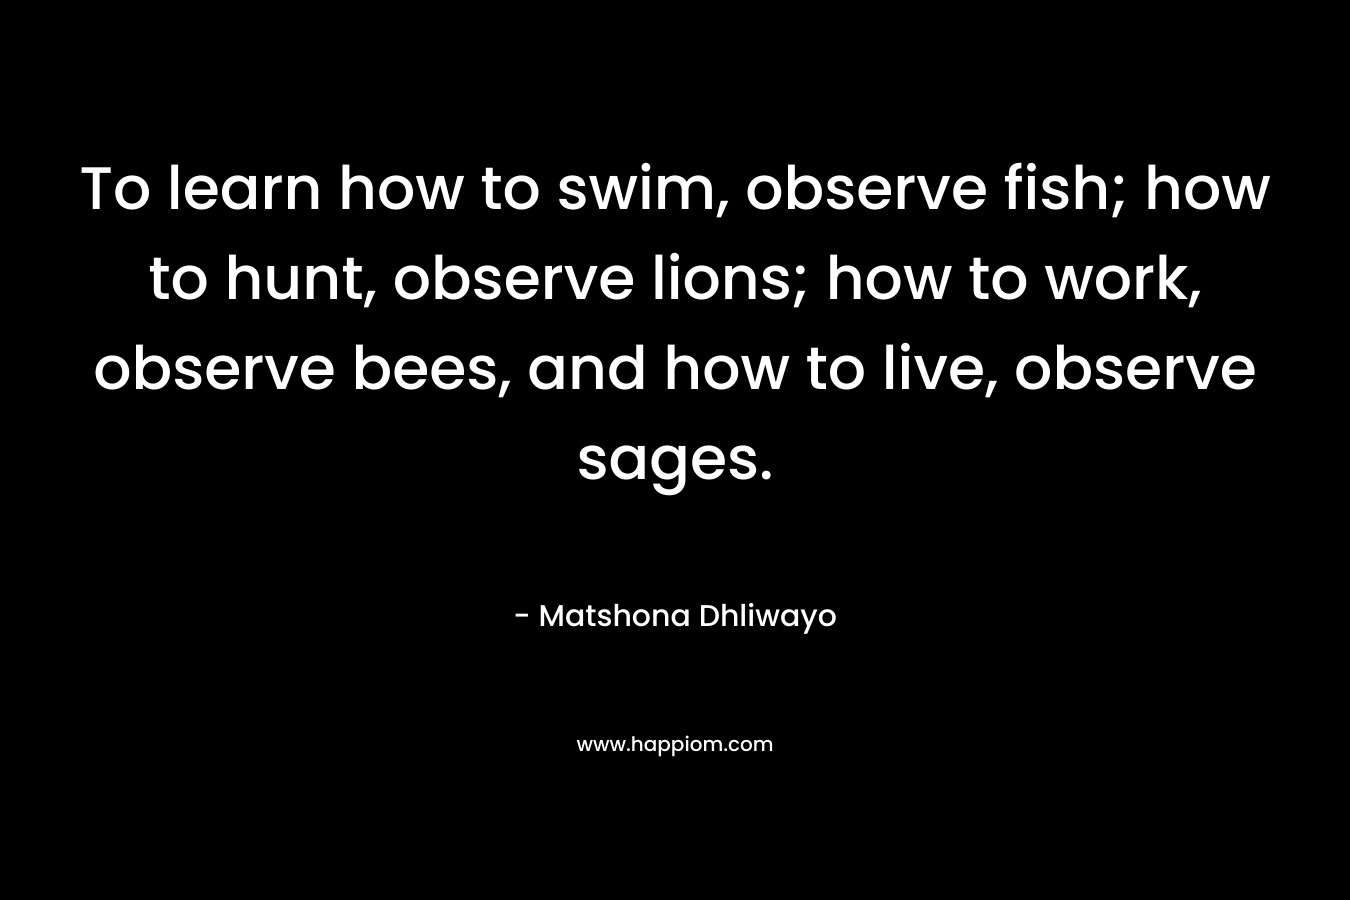 To learn how to swim, observe fish; how to hunt, observe lions; how to work, observe bees, and how to live, observe sages.